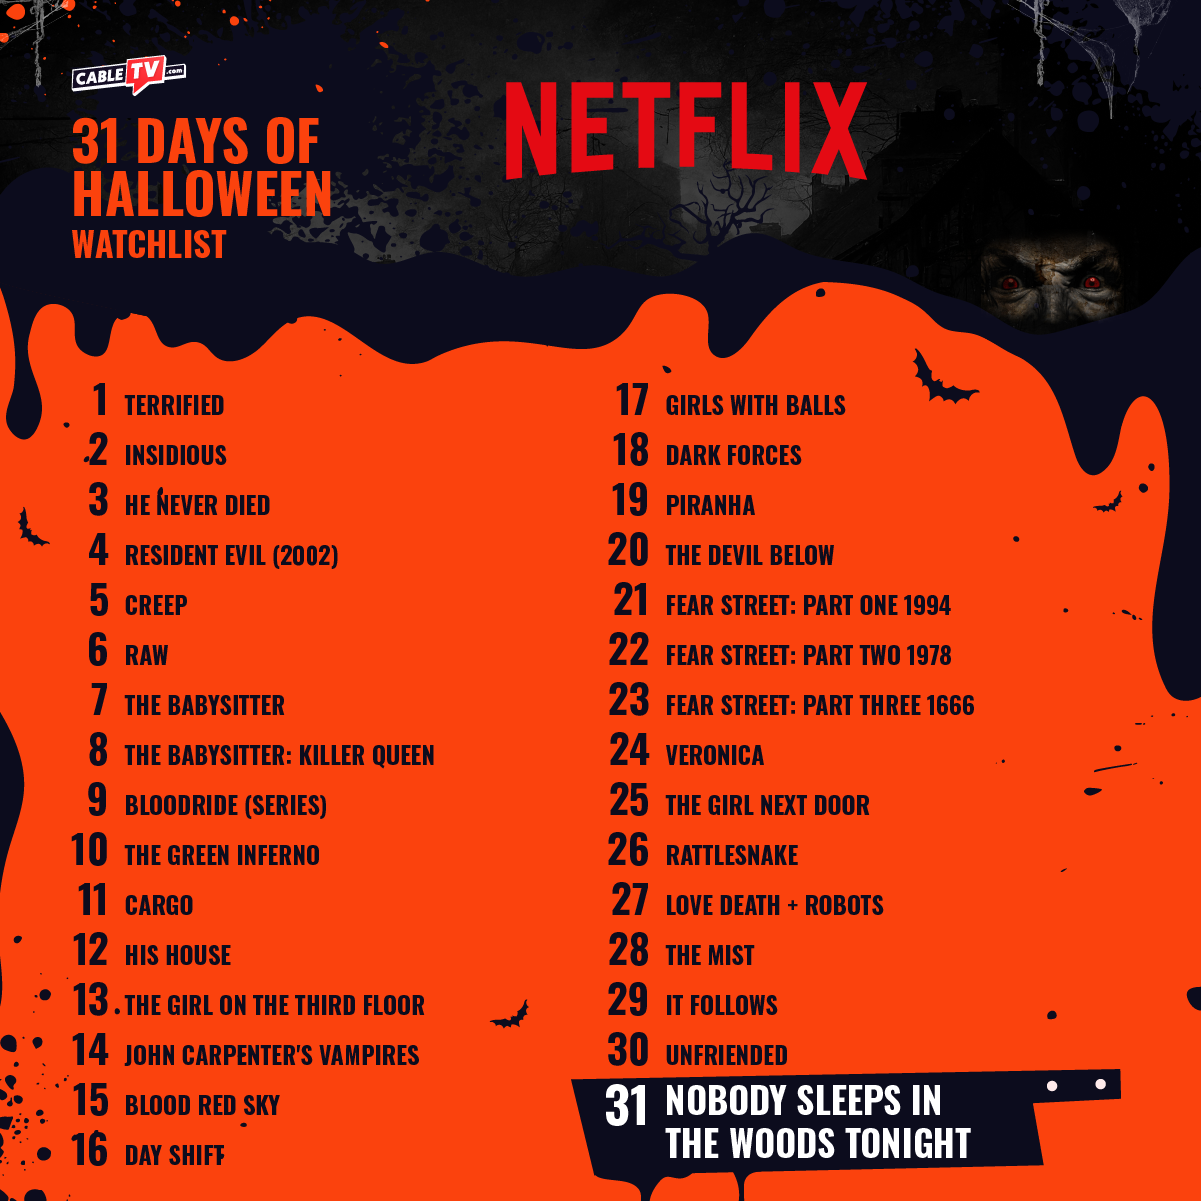 List of 31 horror movies to watch in October on Netflix